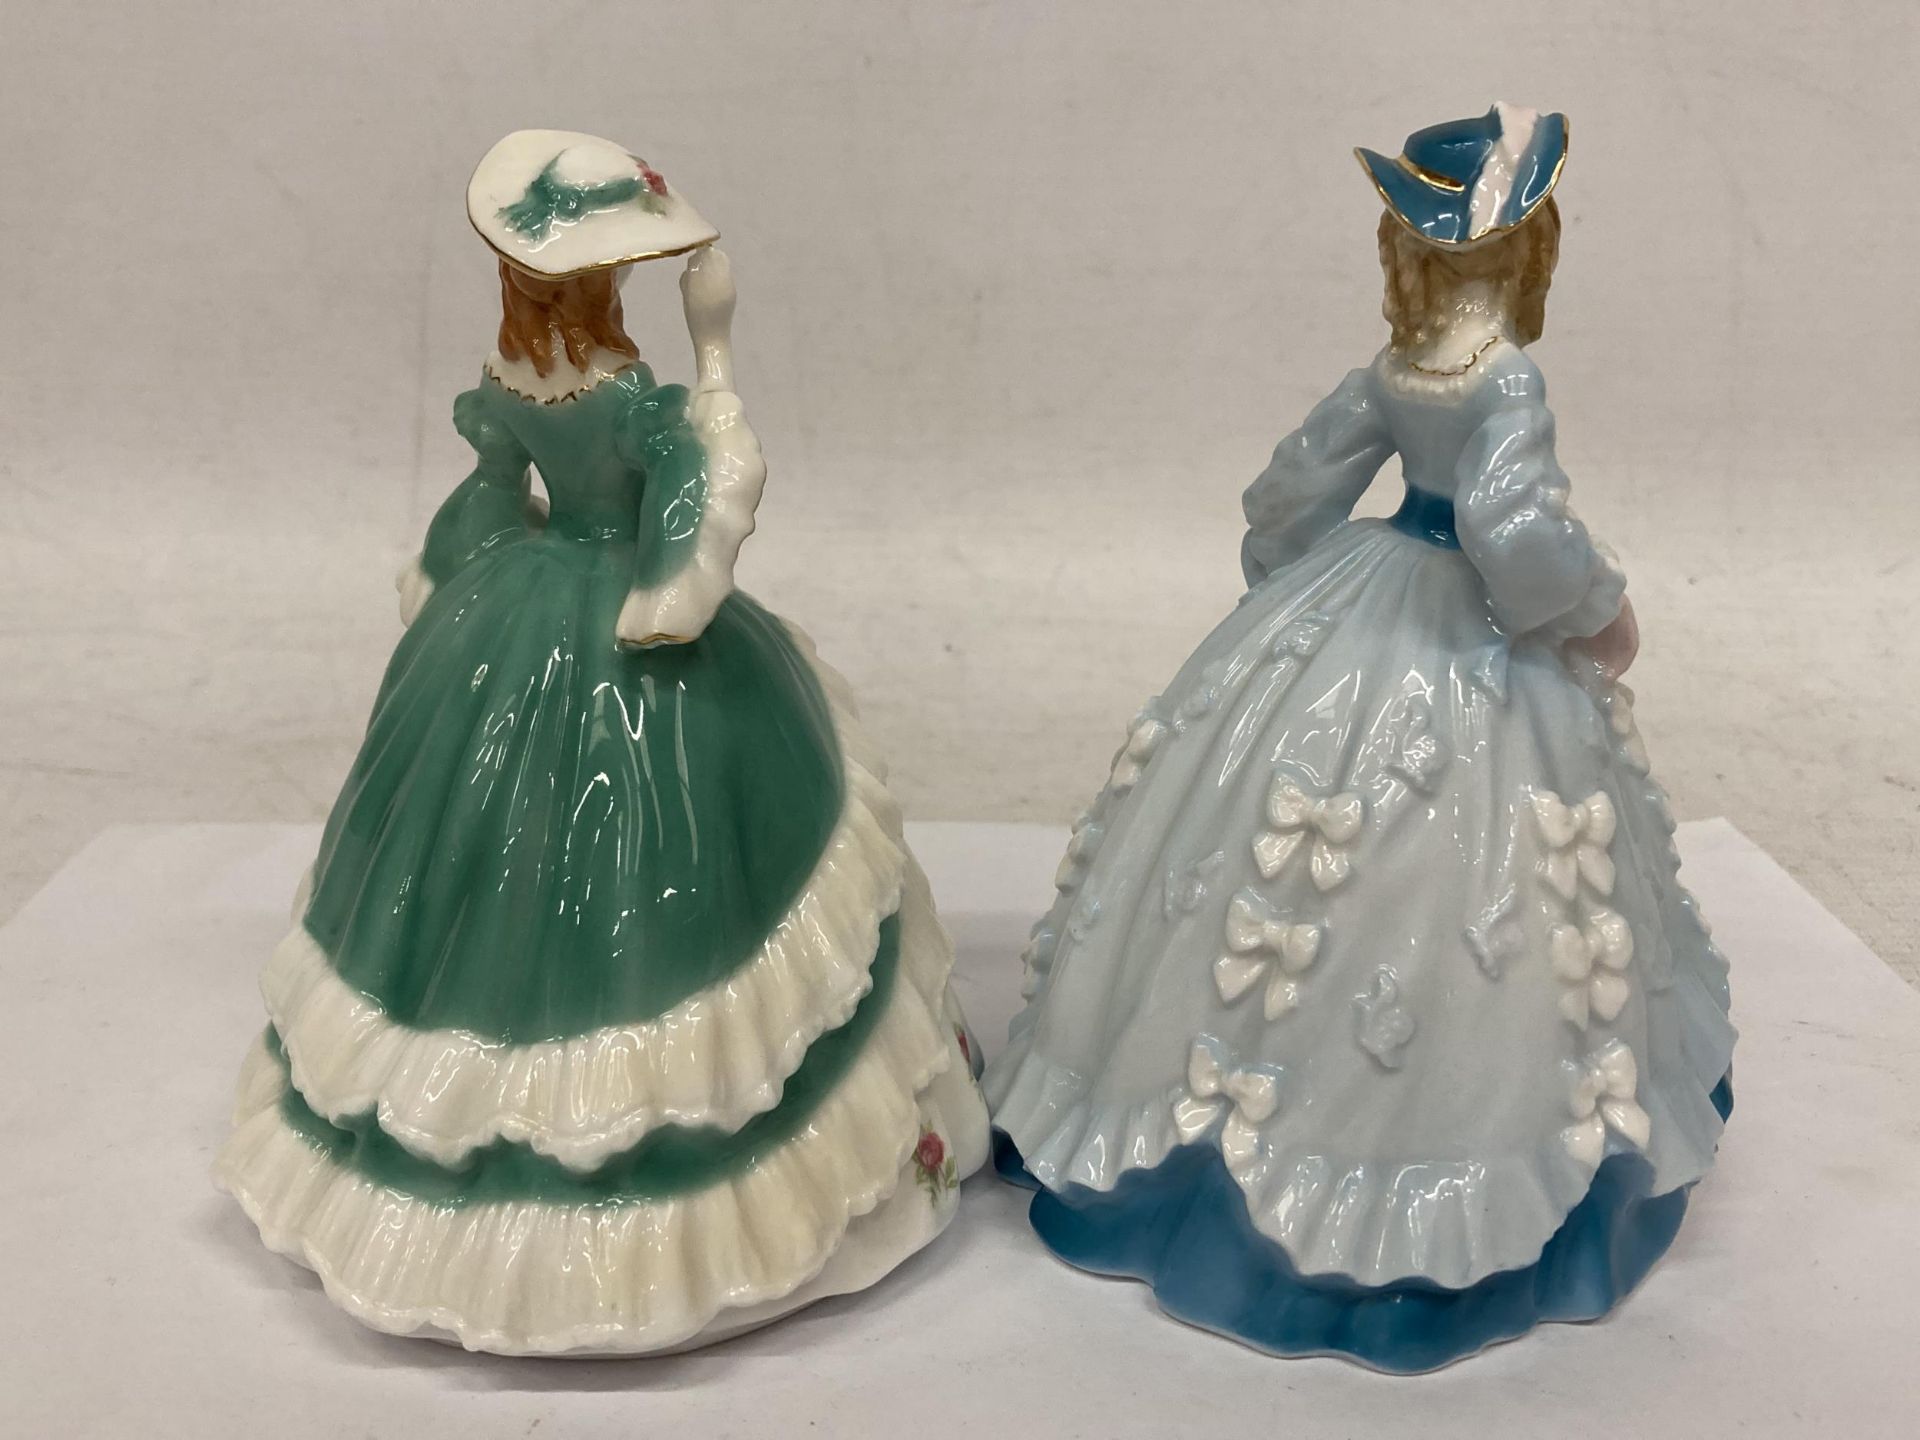 TWO ROYAL WORCESTER FIGURINES FROM THE FASIONABLE VICTORIANS COLLECTION "LADY SARAH" LIMITED EDITION - Image 2 of 4